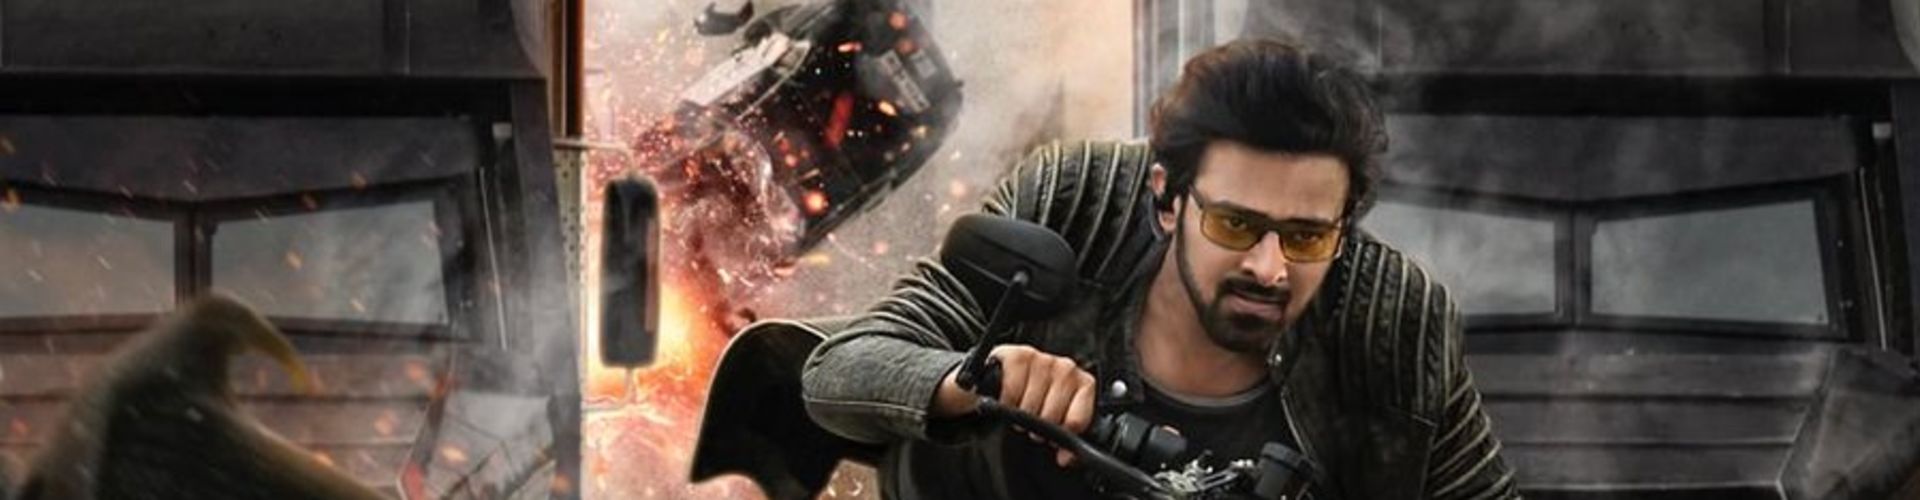 Prabhas And Shraddha Kapoor Are Mind-Blowing in Saaho Teaser